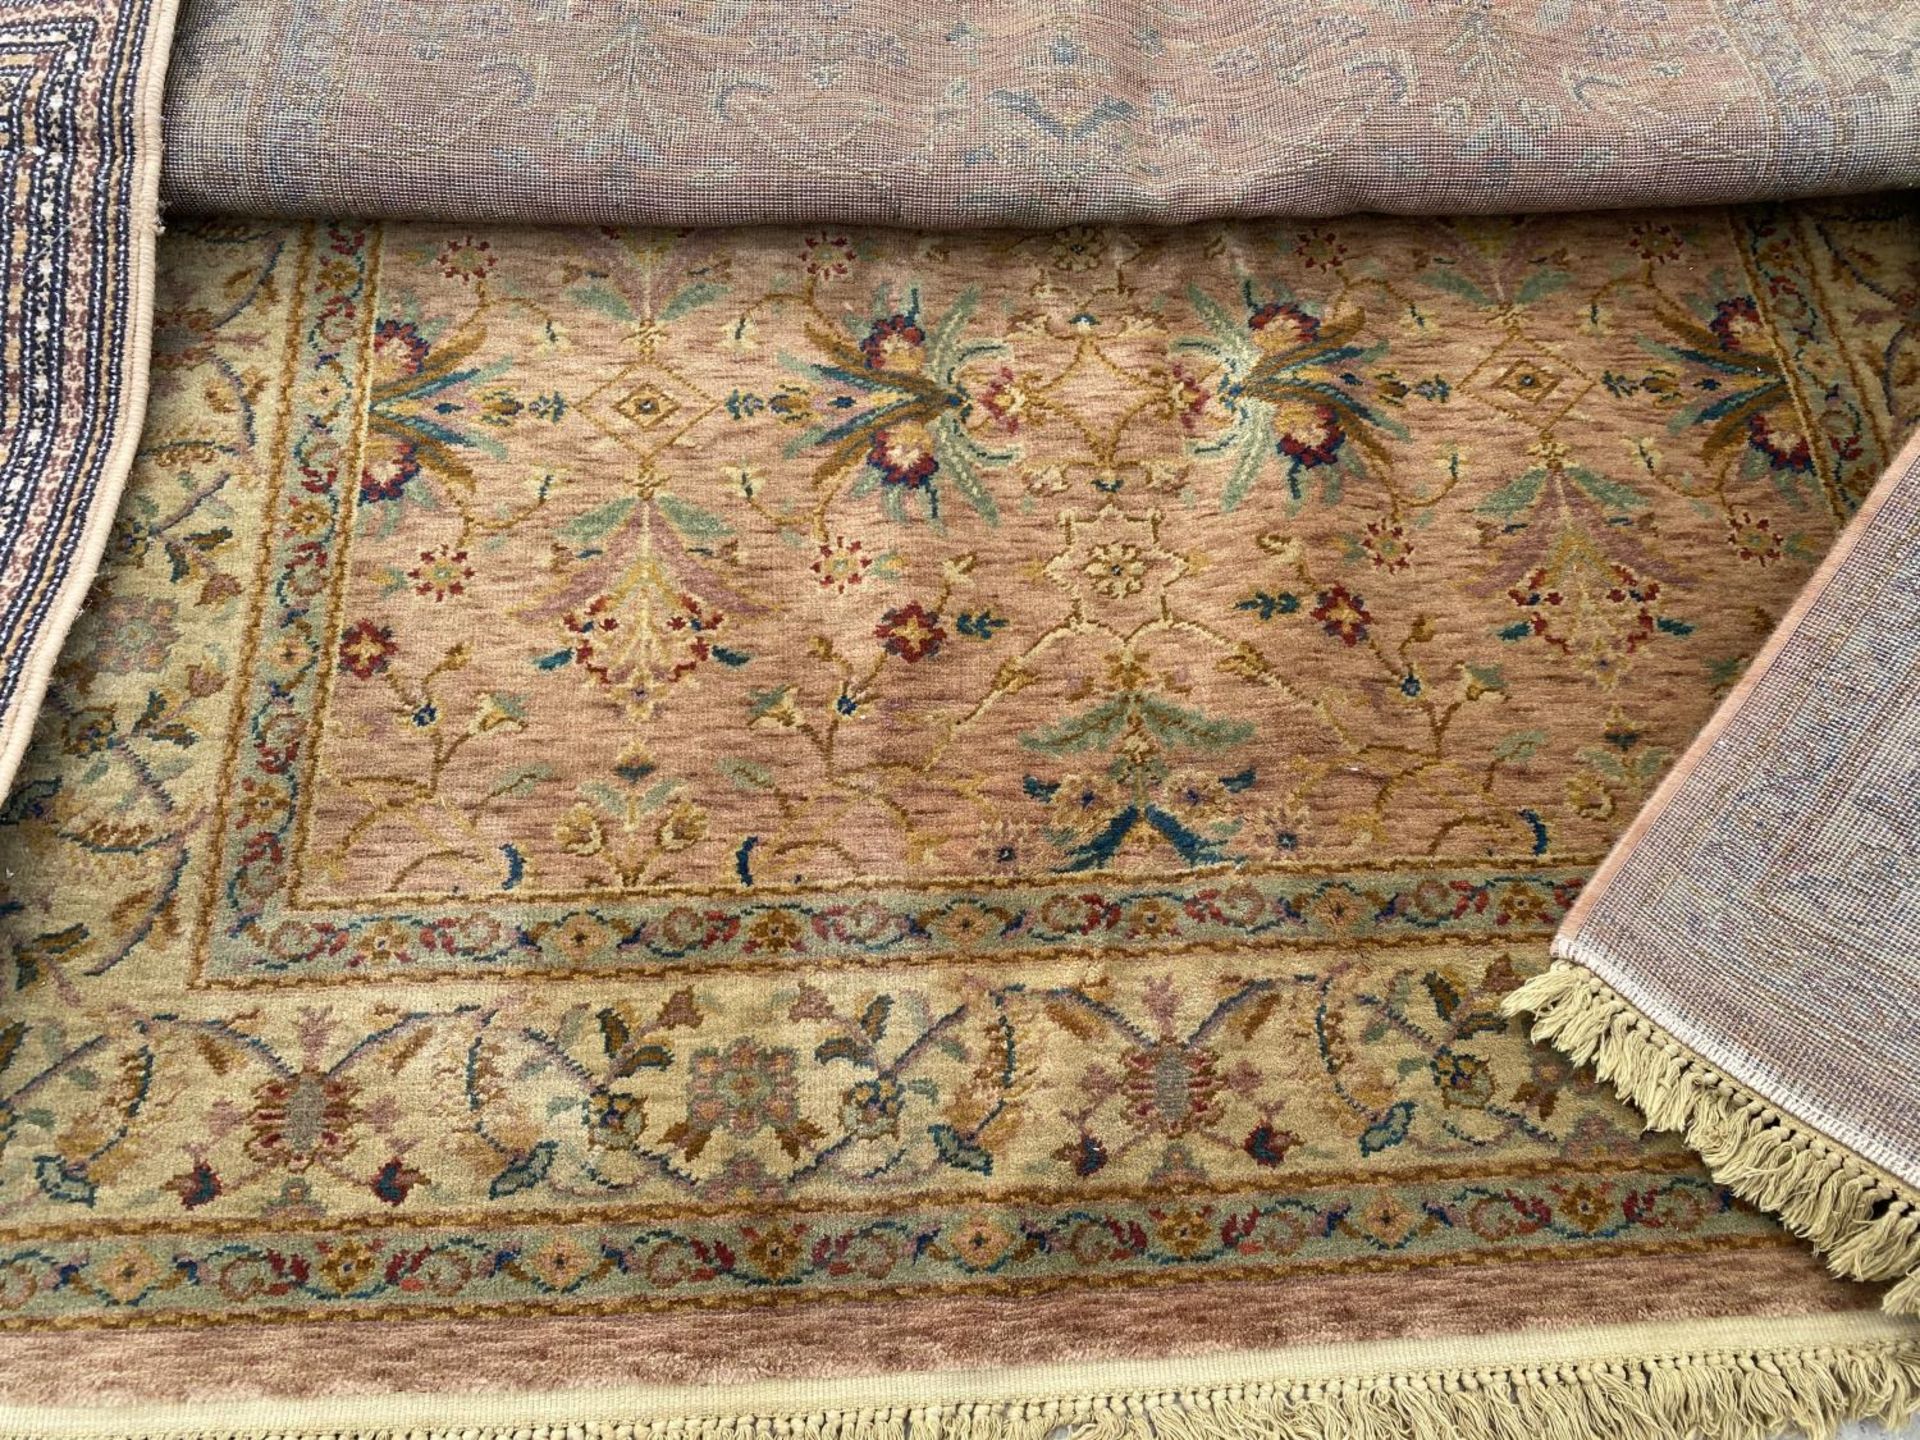 TWO BROWN PATTERNED RUGS - Image 3 of 3